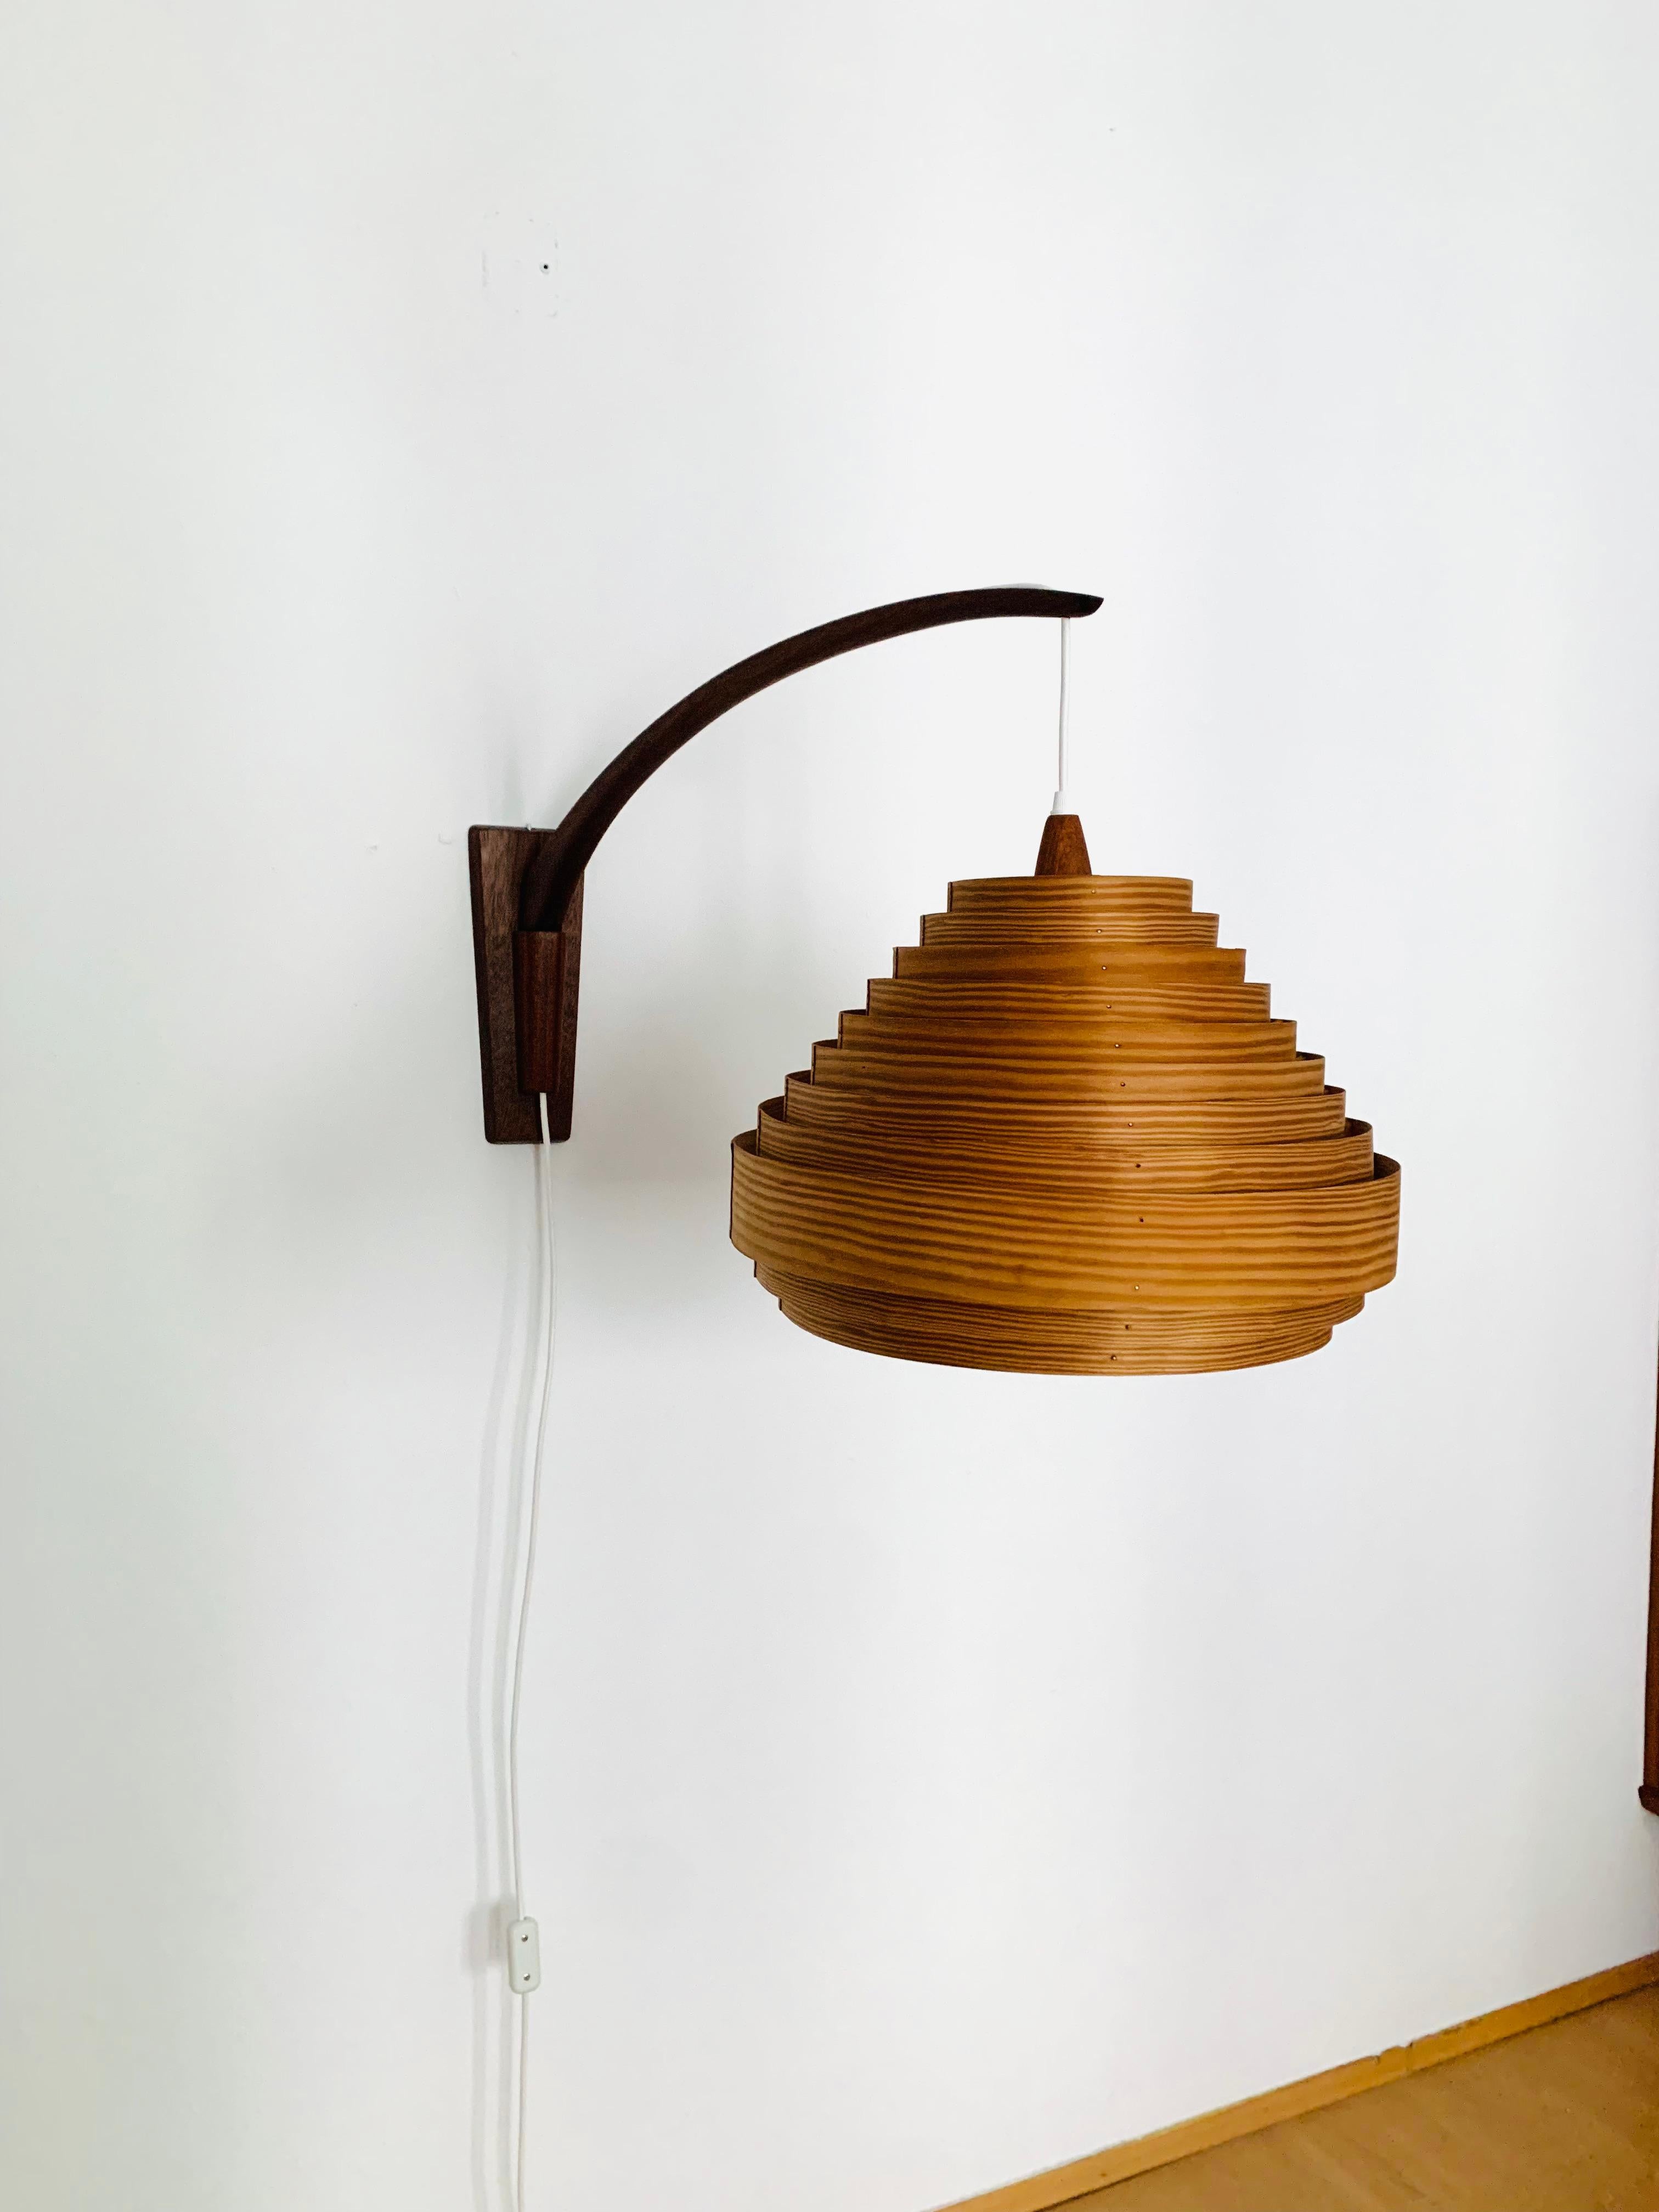 Very large teak wall lamp from the 1960s.
Great and unusual design with a fantastically elegant appearance.
Very nice swiveling teak arm.
The pine wood lampshade creates a spectacular play of light and creates a very cozy